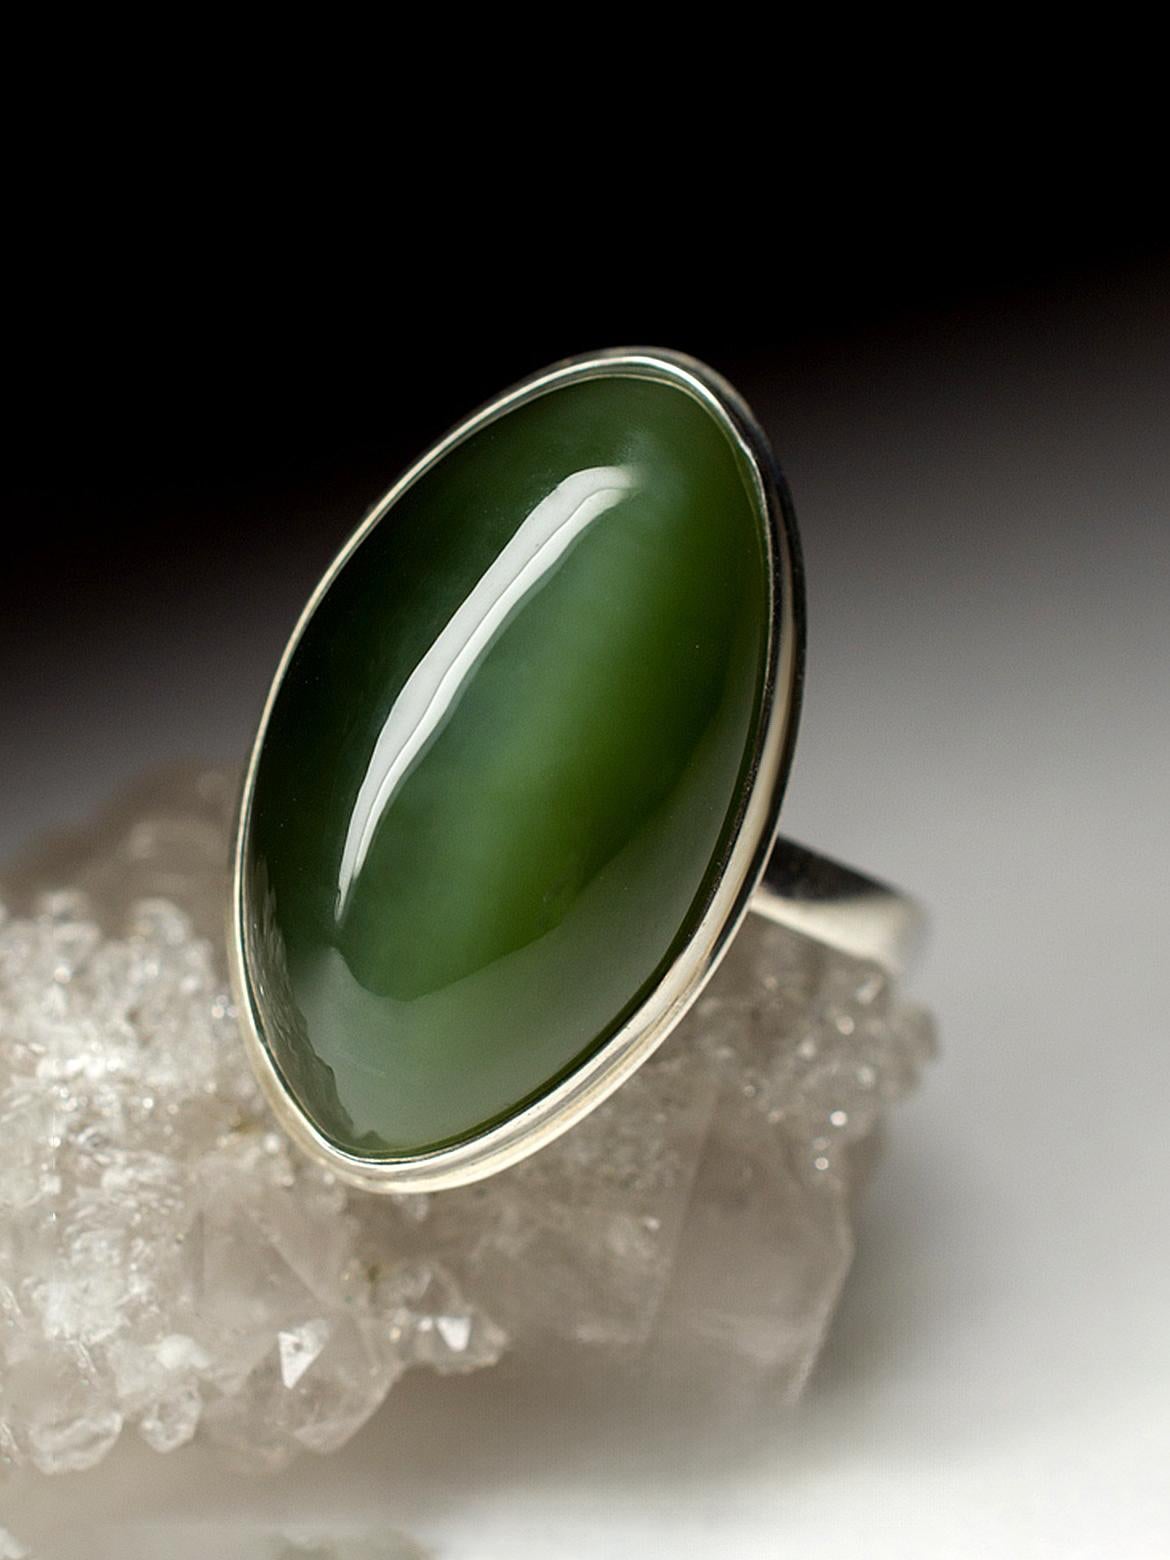 Vintage sterling silver ring with natural chatoyant Jade / Nephrite (cat's eye effect)
Jade measurements - 0.35 x 0.47 x 0.83 in / 9 х 12 х 21 mm
ring size - 8 US
ring weight - 6 grams